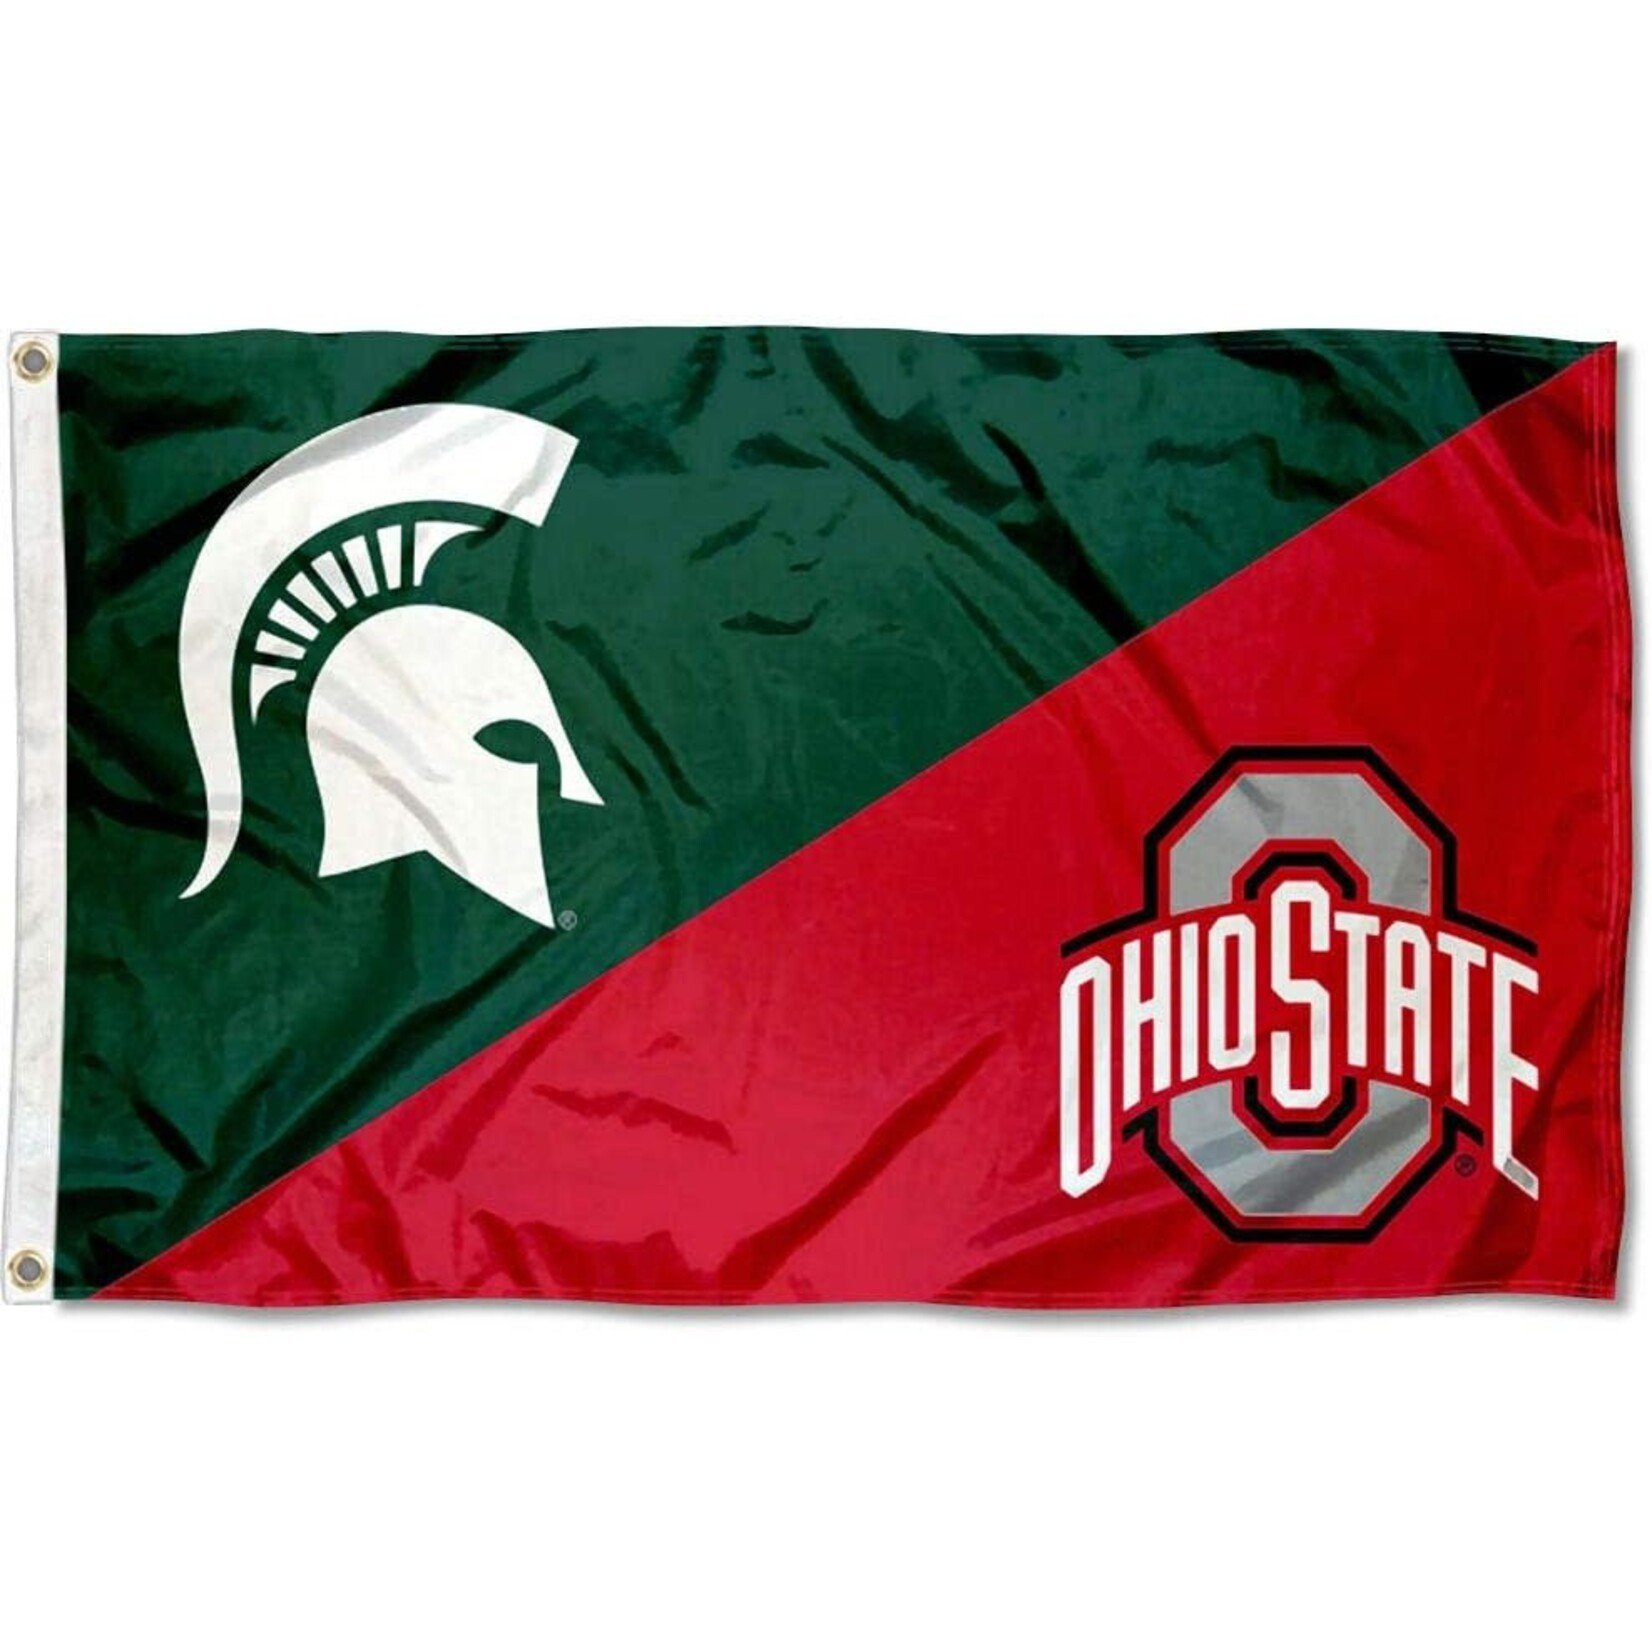 Sewing Concepts HD Flag 3x5' SS MSU Over Ohio